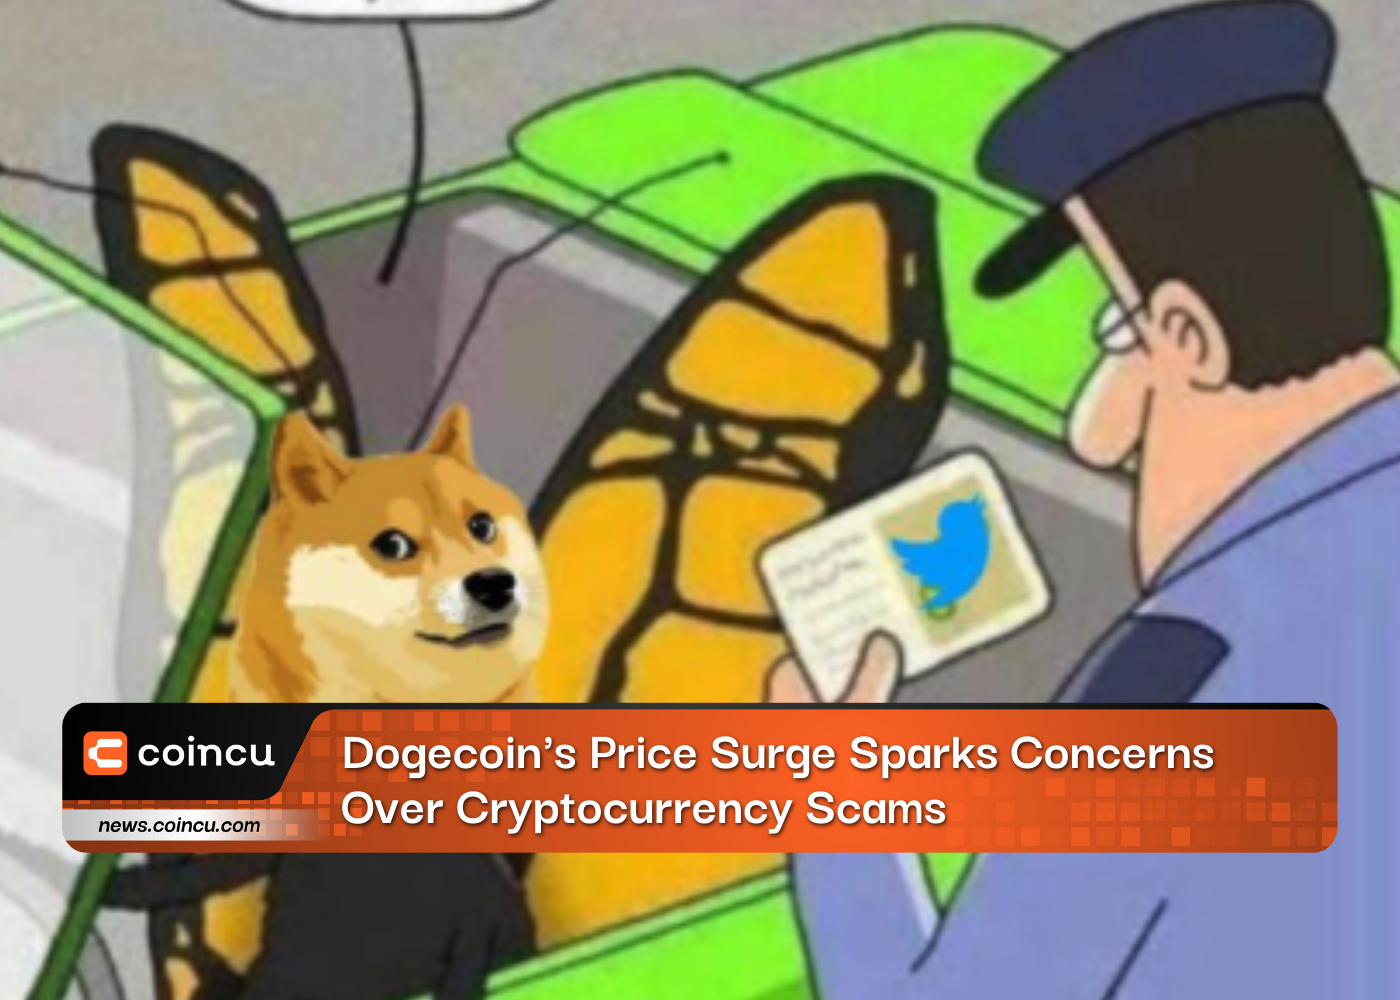 Dogecoin's Price Surge Sparks Concerns Over Cryptocurrency Scams